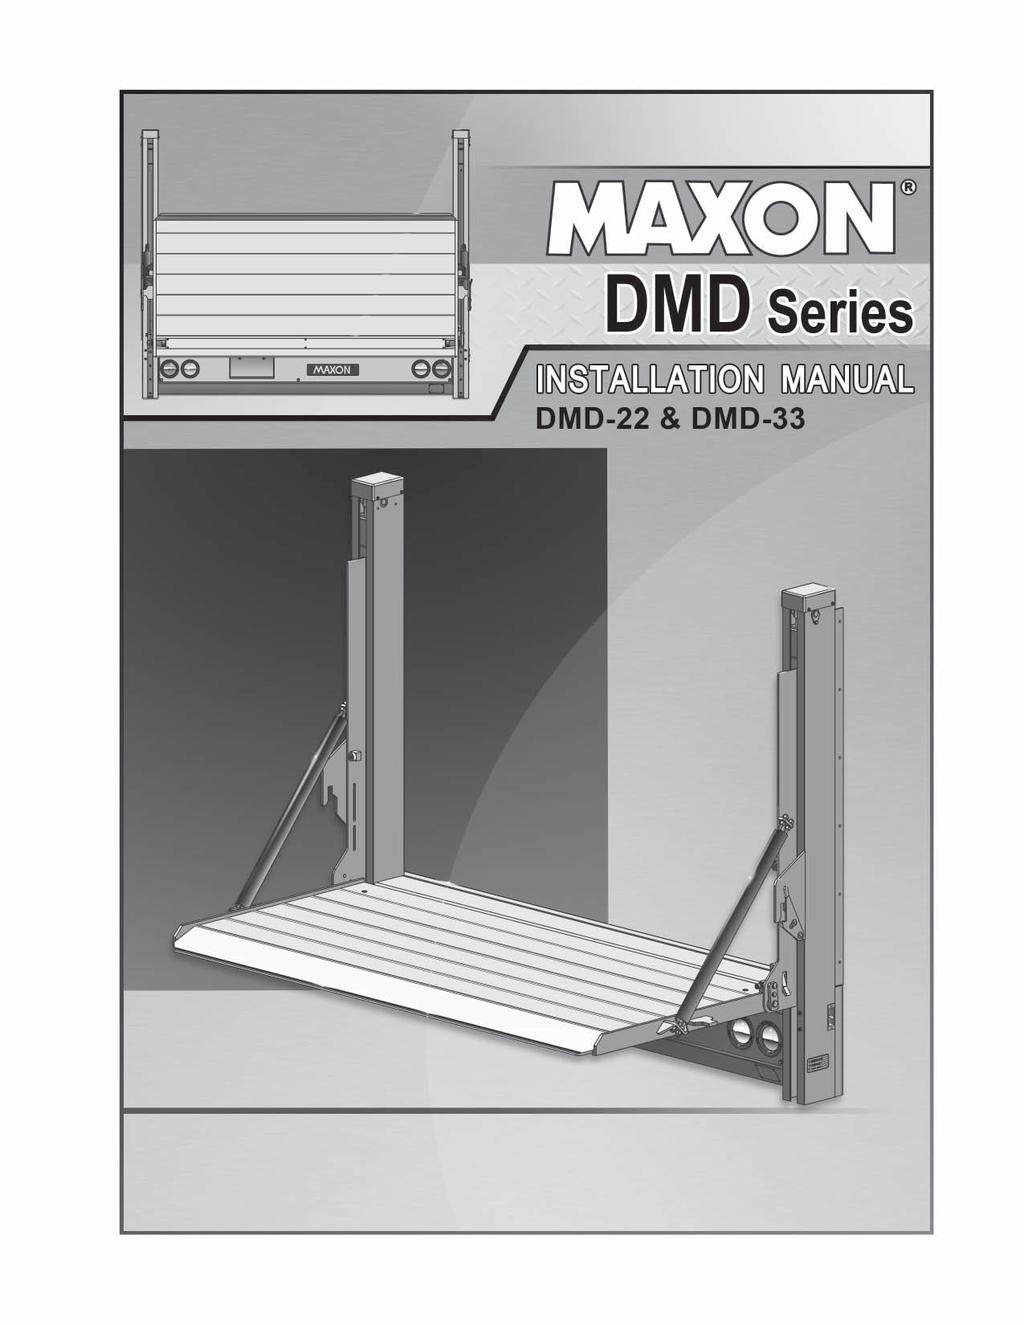 M-16-38 JUNE 2018 To fi nd maintenance & parts information for your DMD Liftgate, go to www.maxonlift. com.